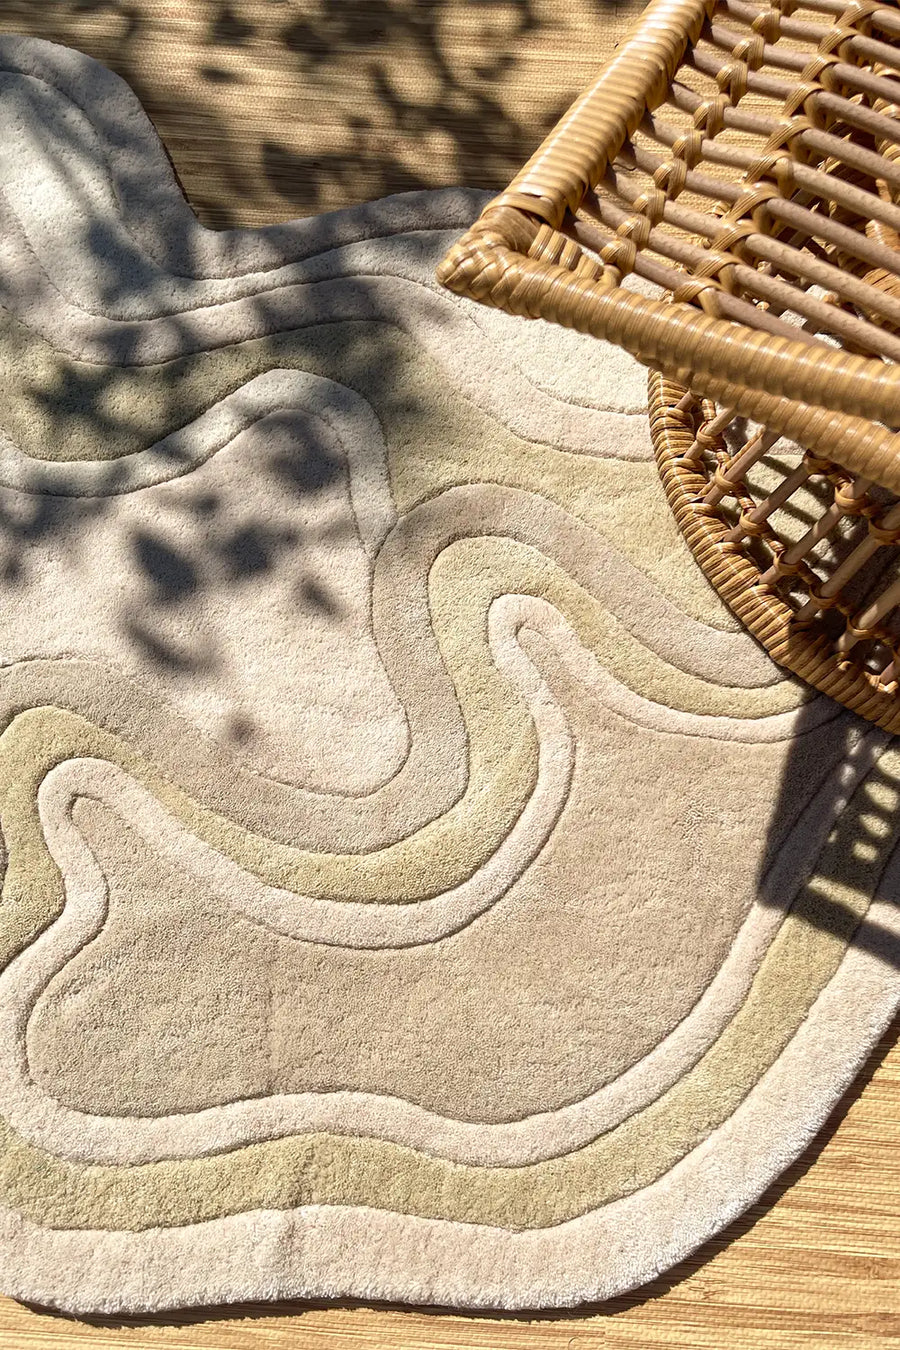 Asymmetrical Rolling Tides Rug - Hand Tufted Wool for Unique Decor